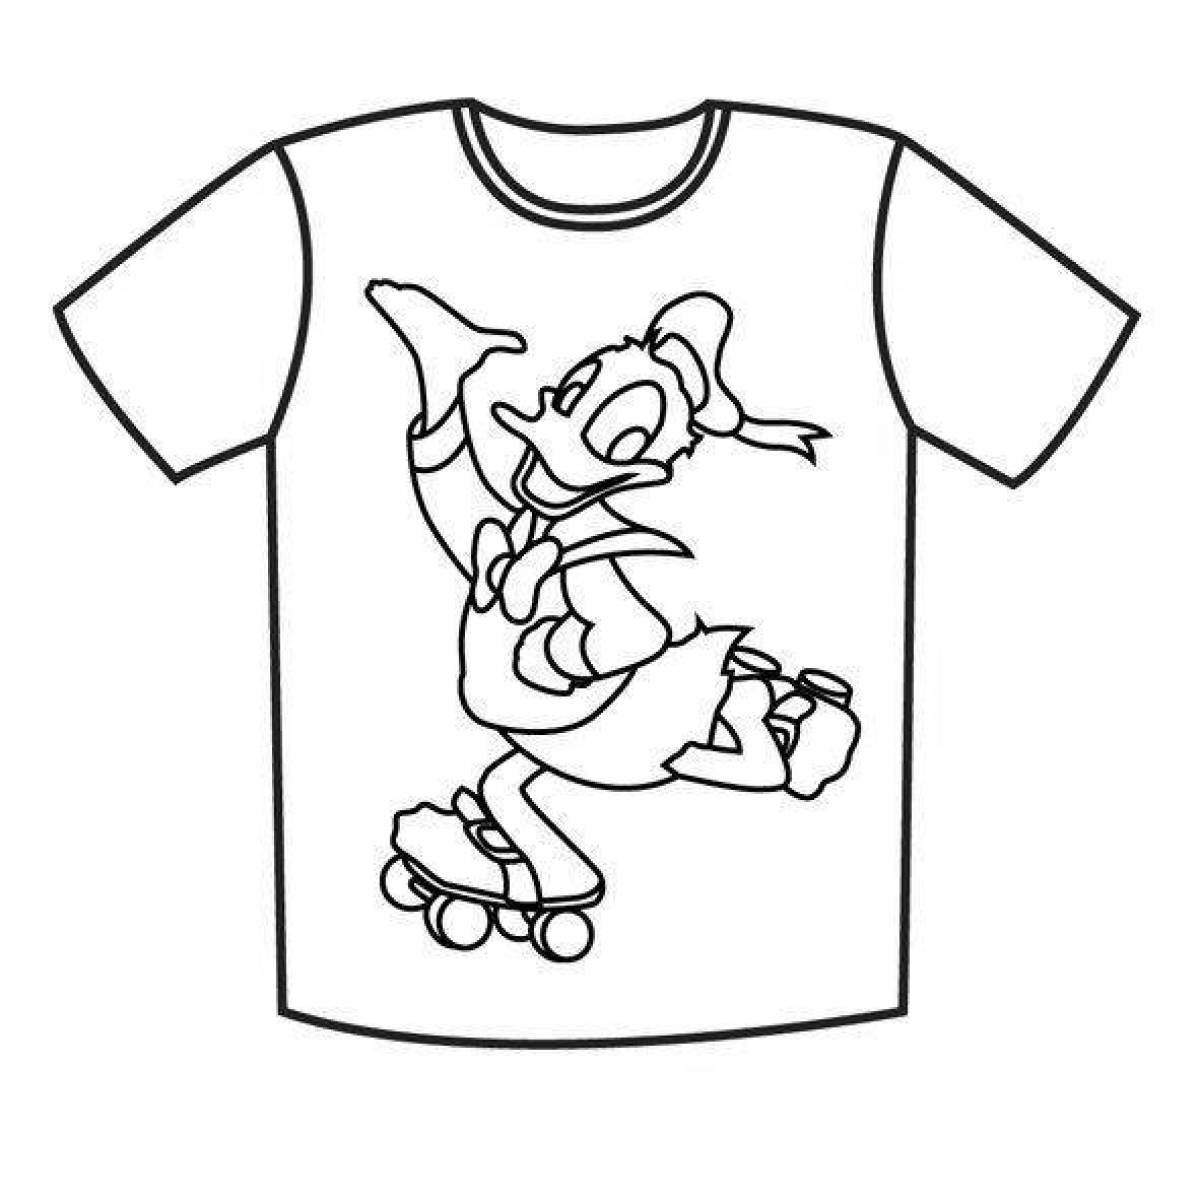 Coloring funny t-shirt